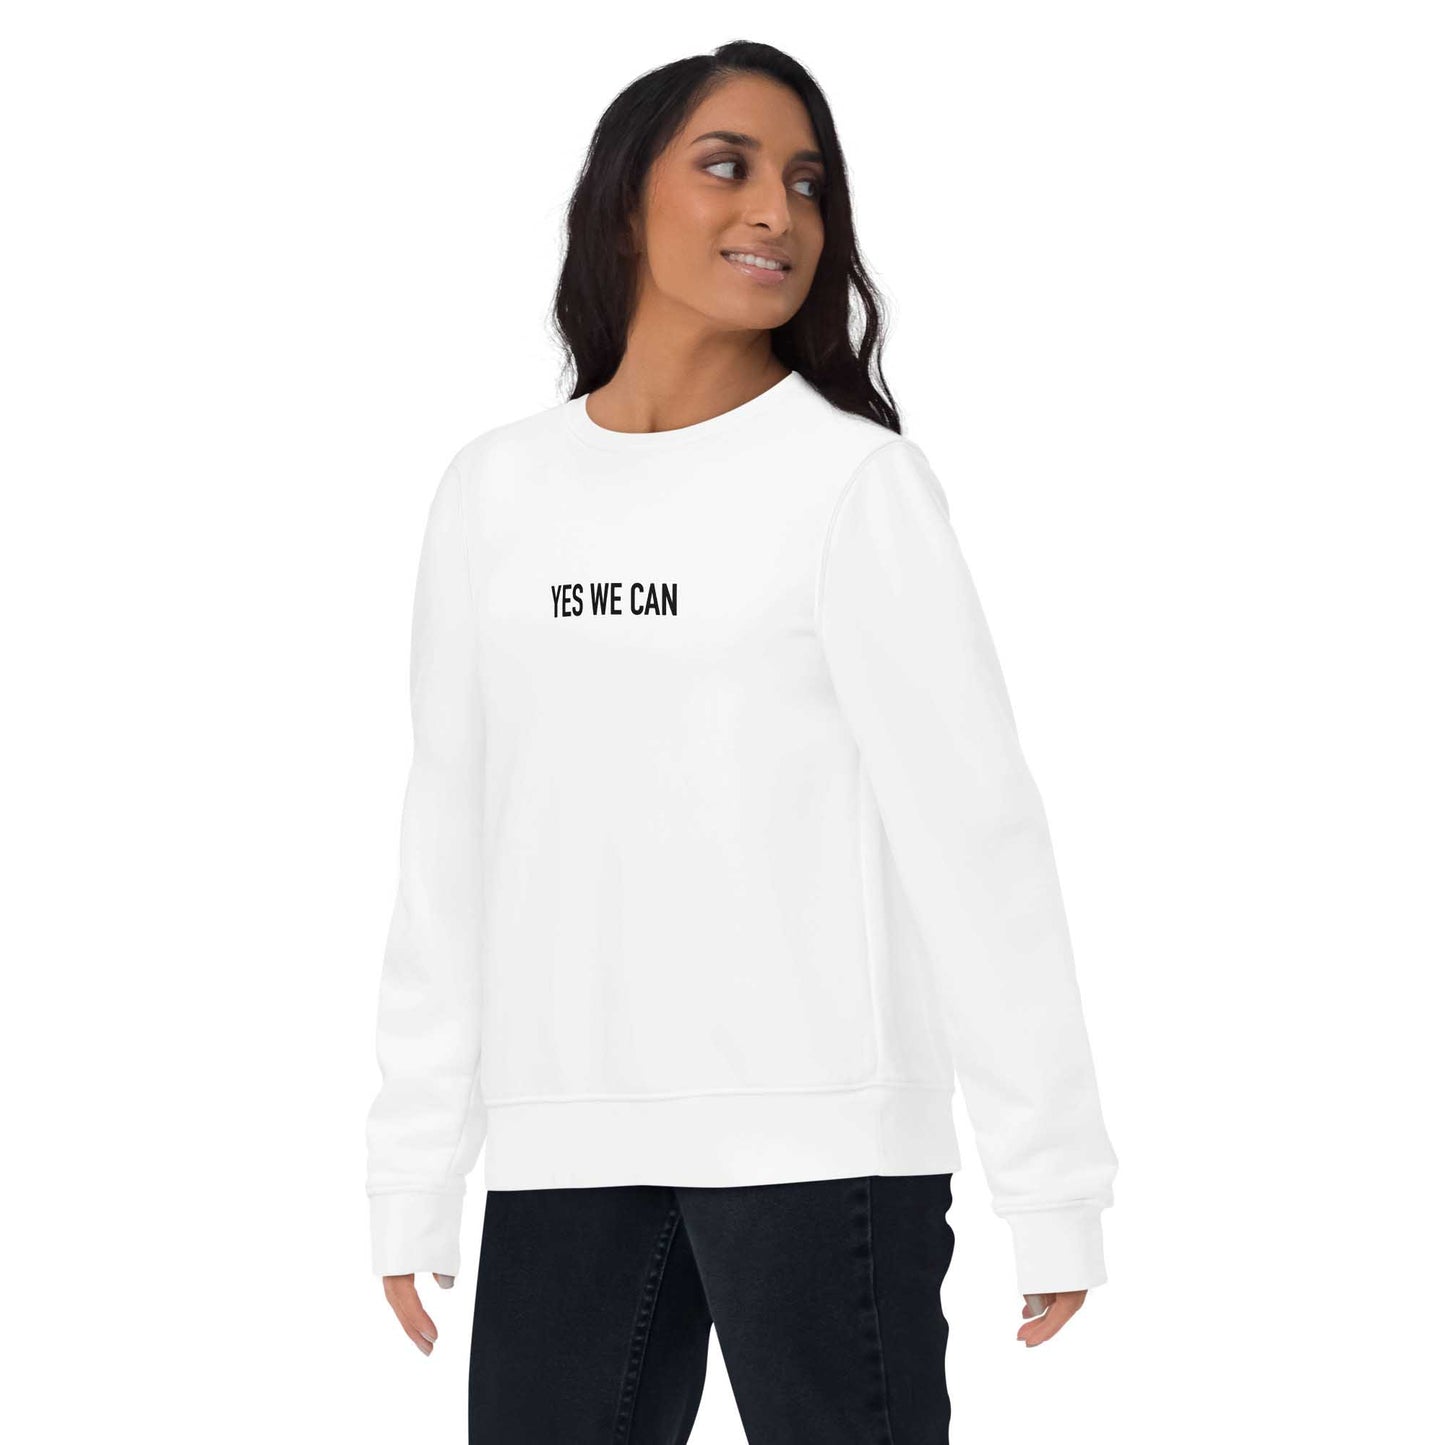 Women white sustainable sweatshirt with Barack Obama's inspirational quote, "Yes We Can." 